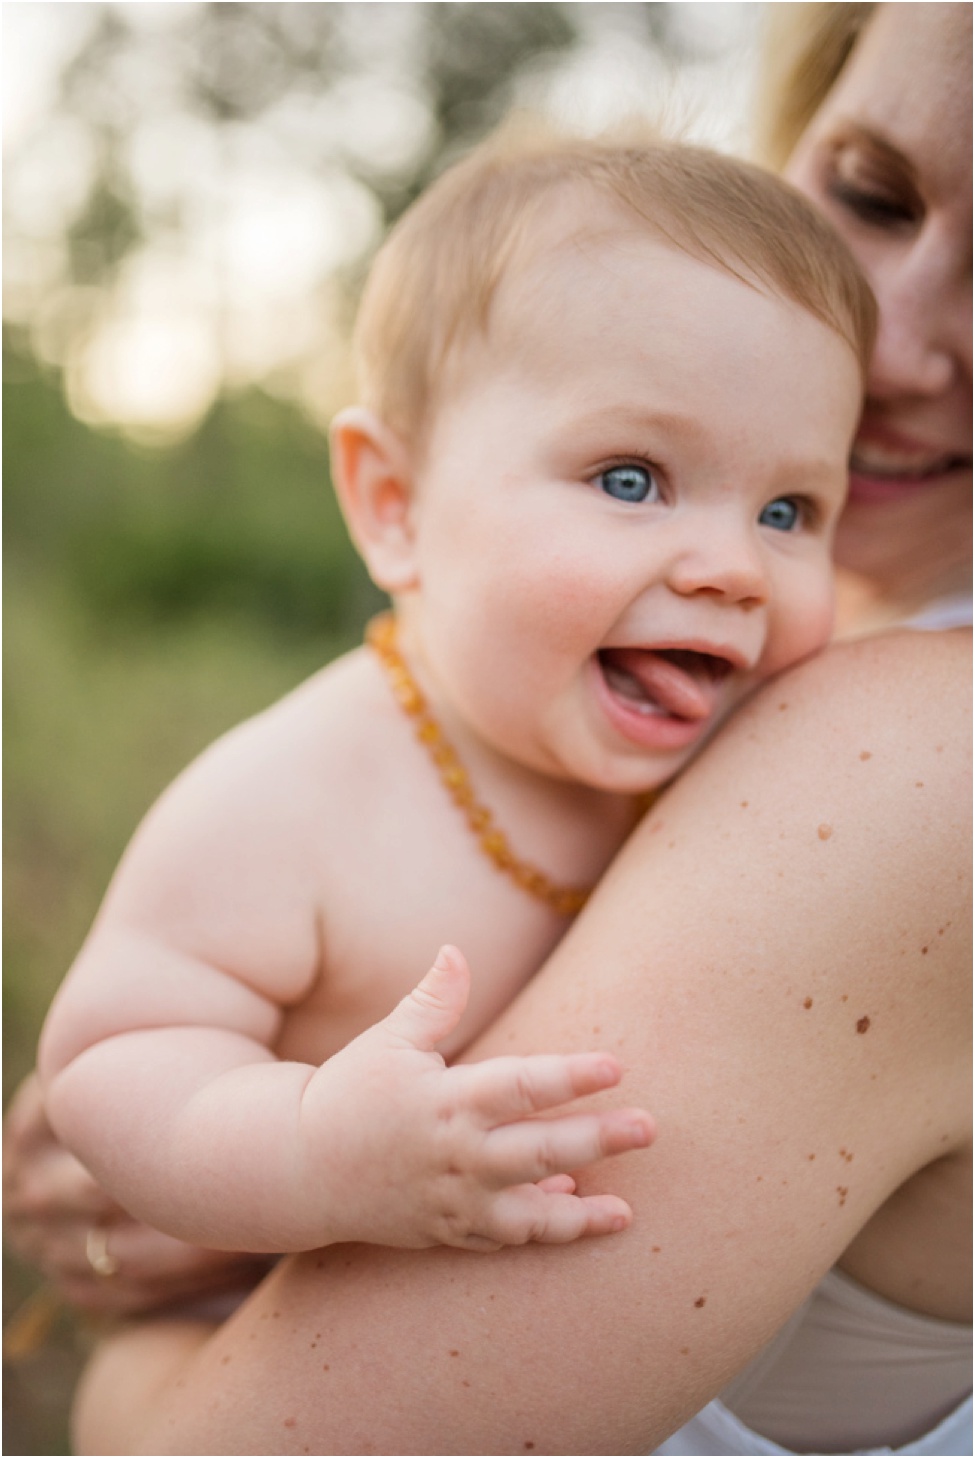 6 month old baby laughing | Atlantic Beach children photographer